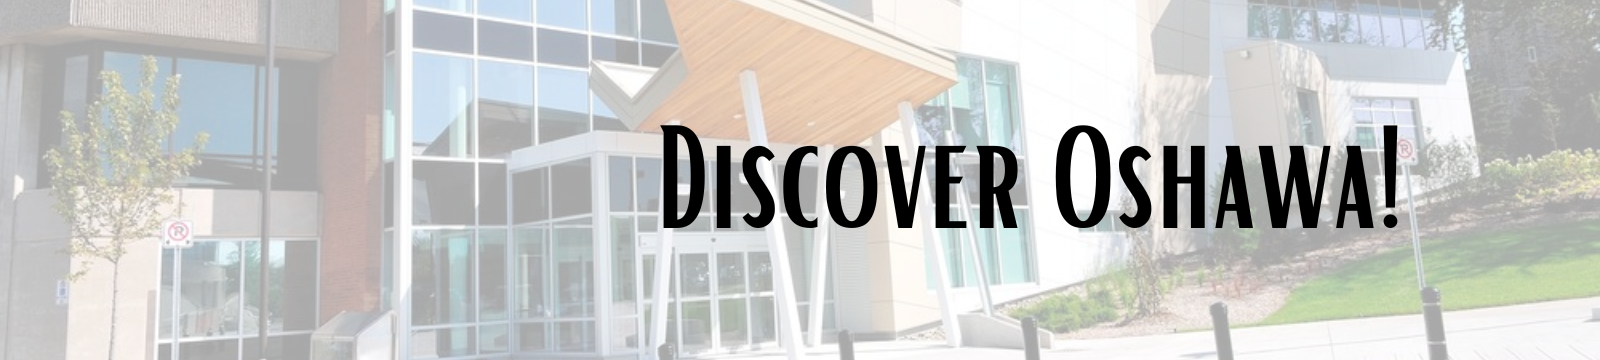 The exterior of a building with the words Discover Oshawa